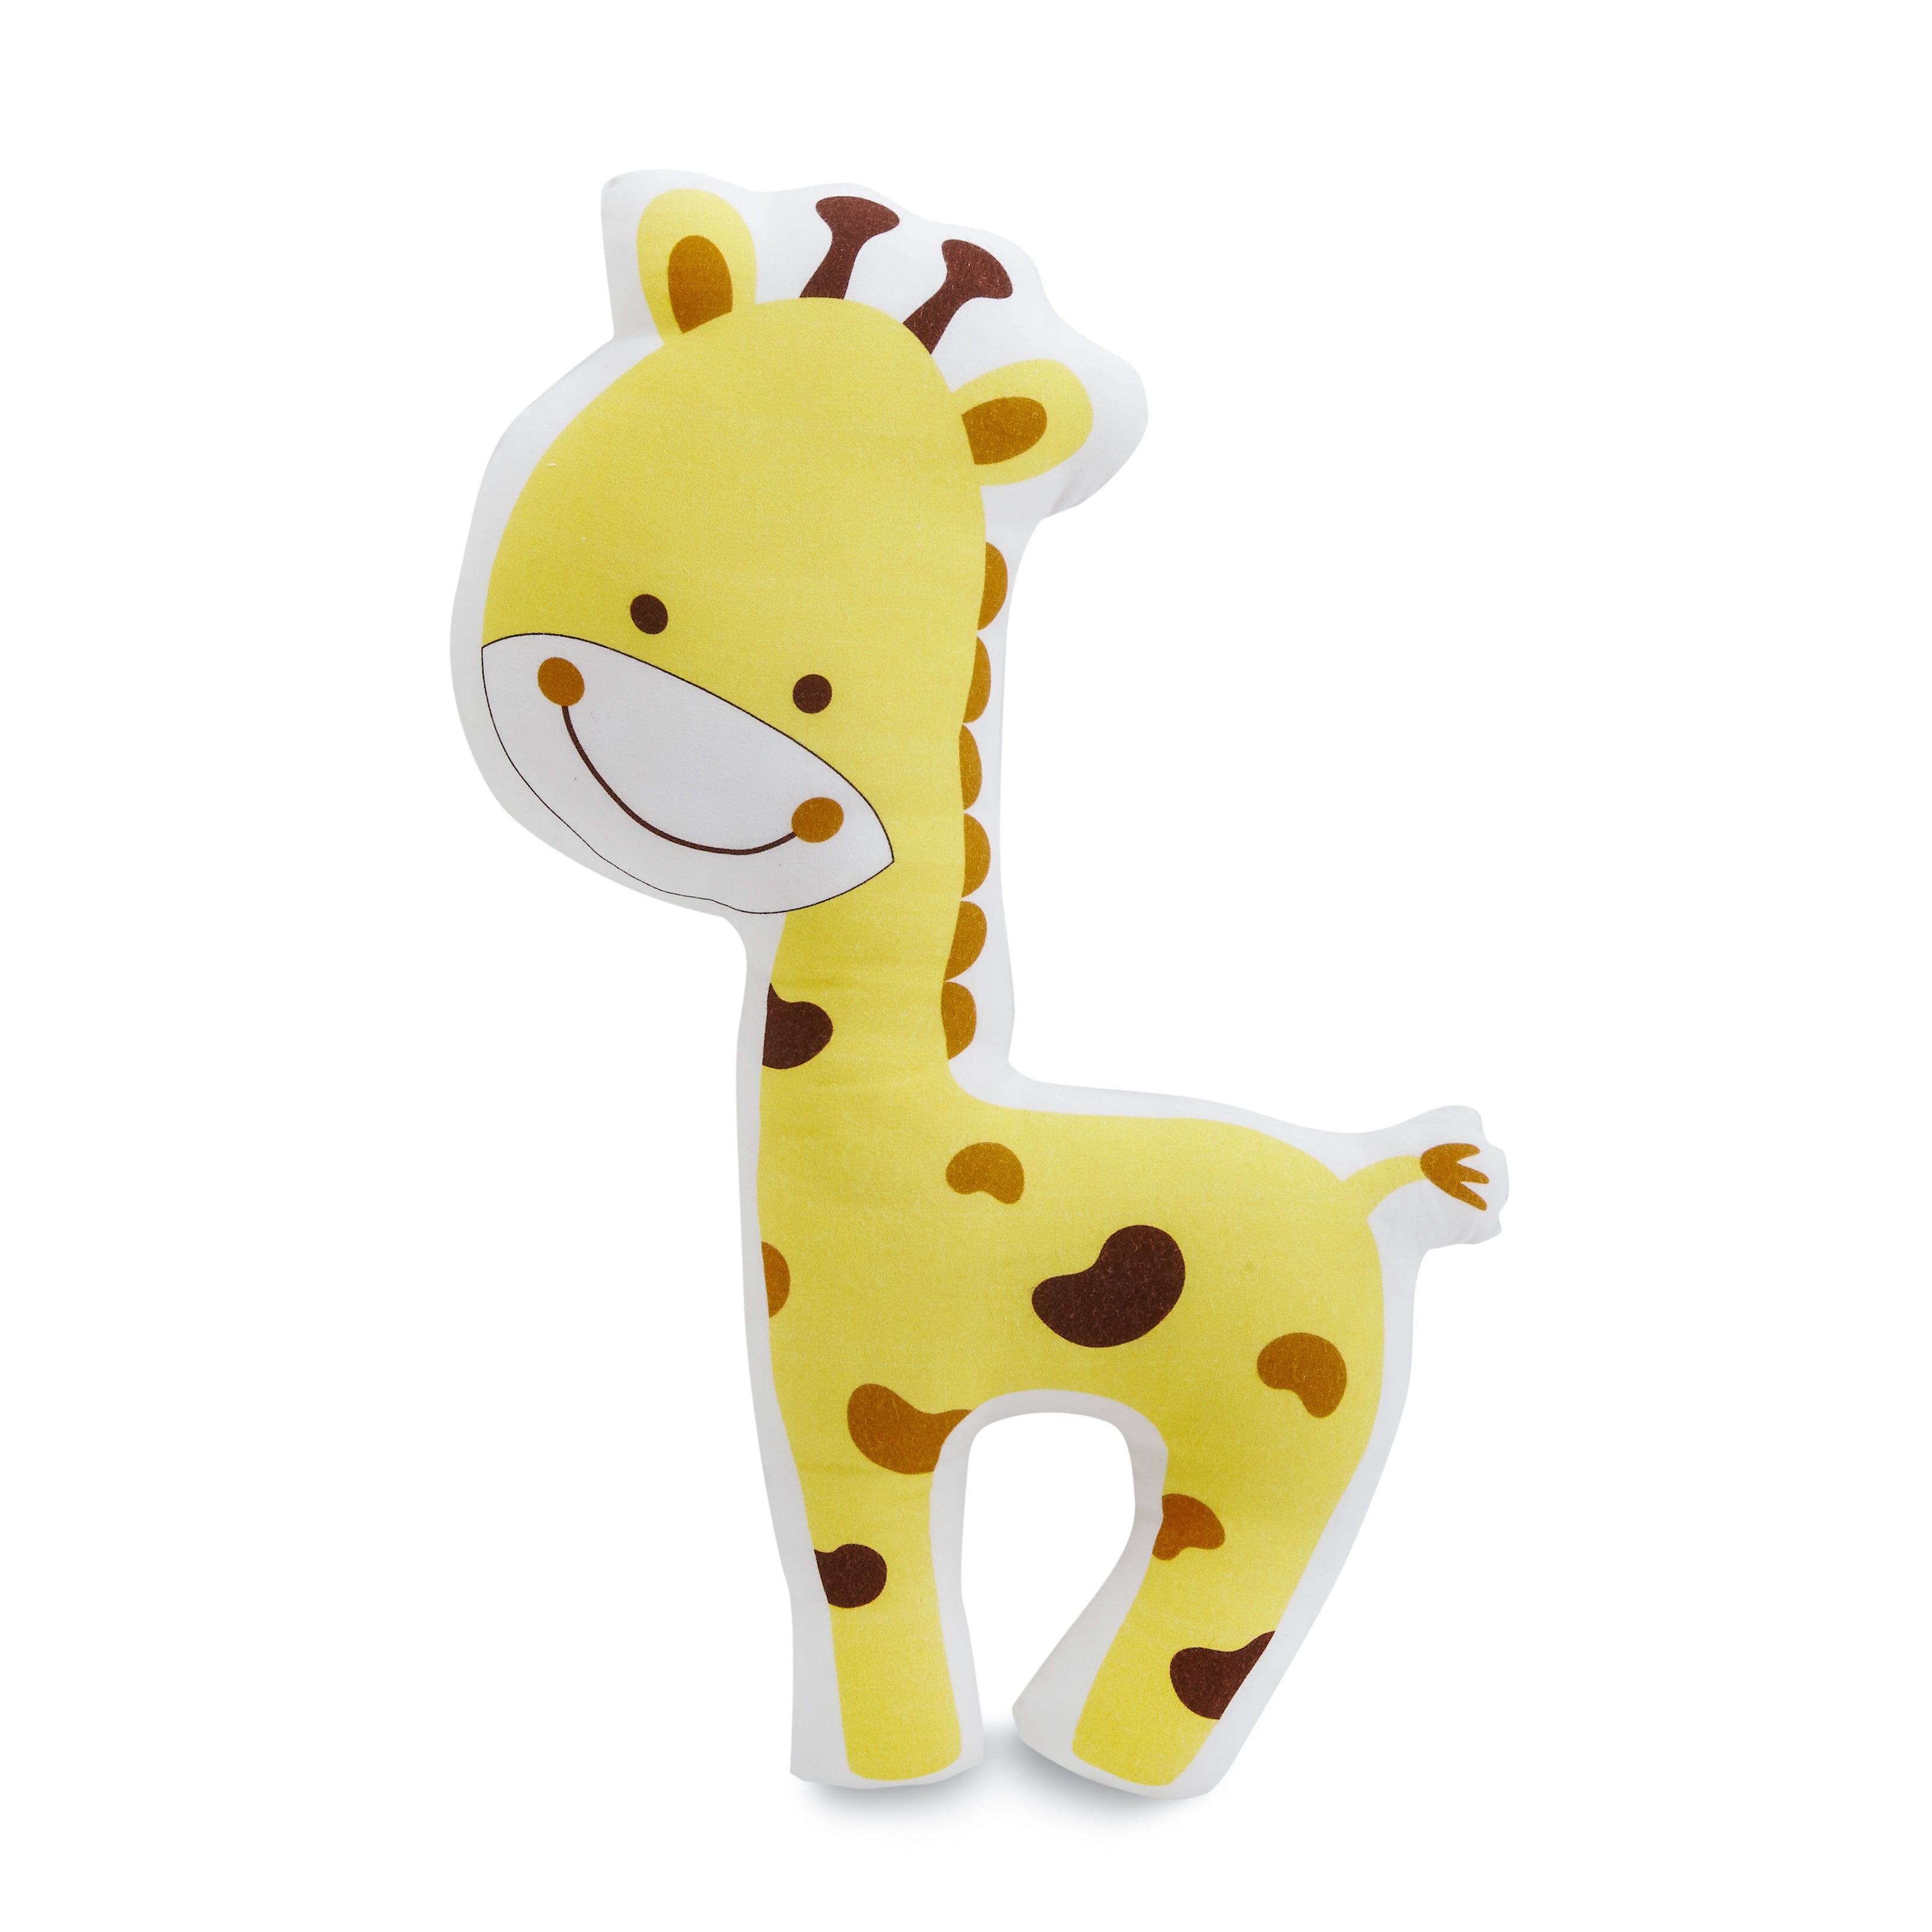 The White Cradle Soft Toys for Baby's Cot - Giraffe